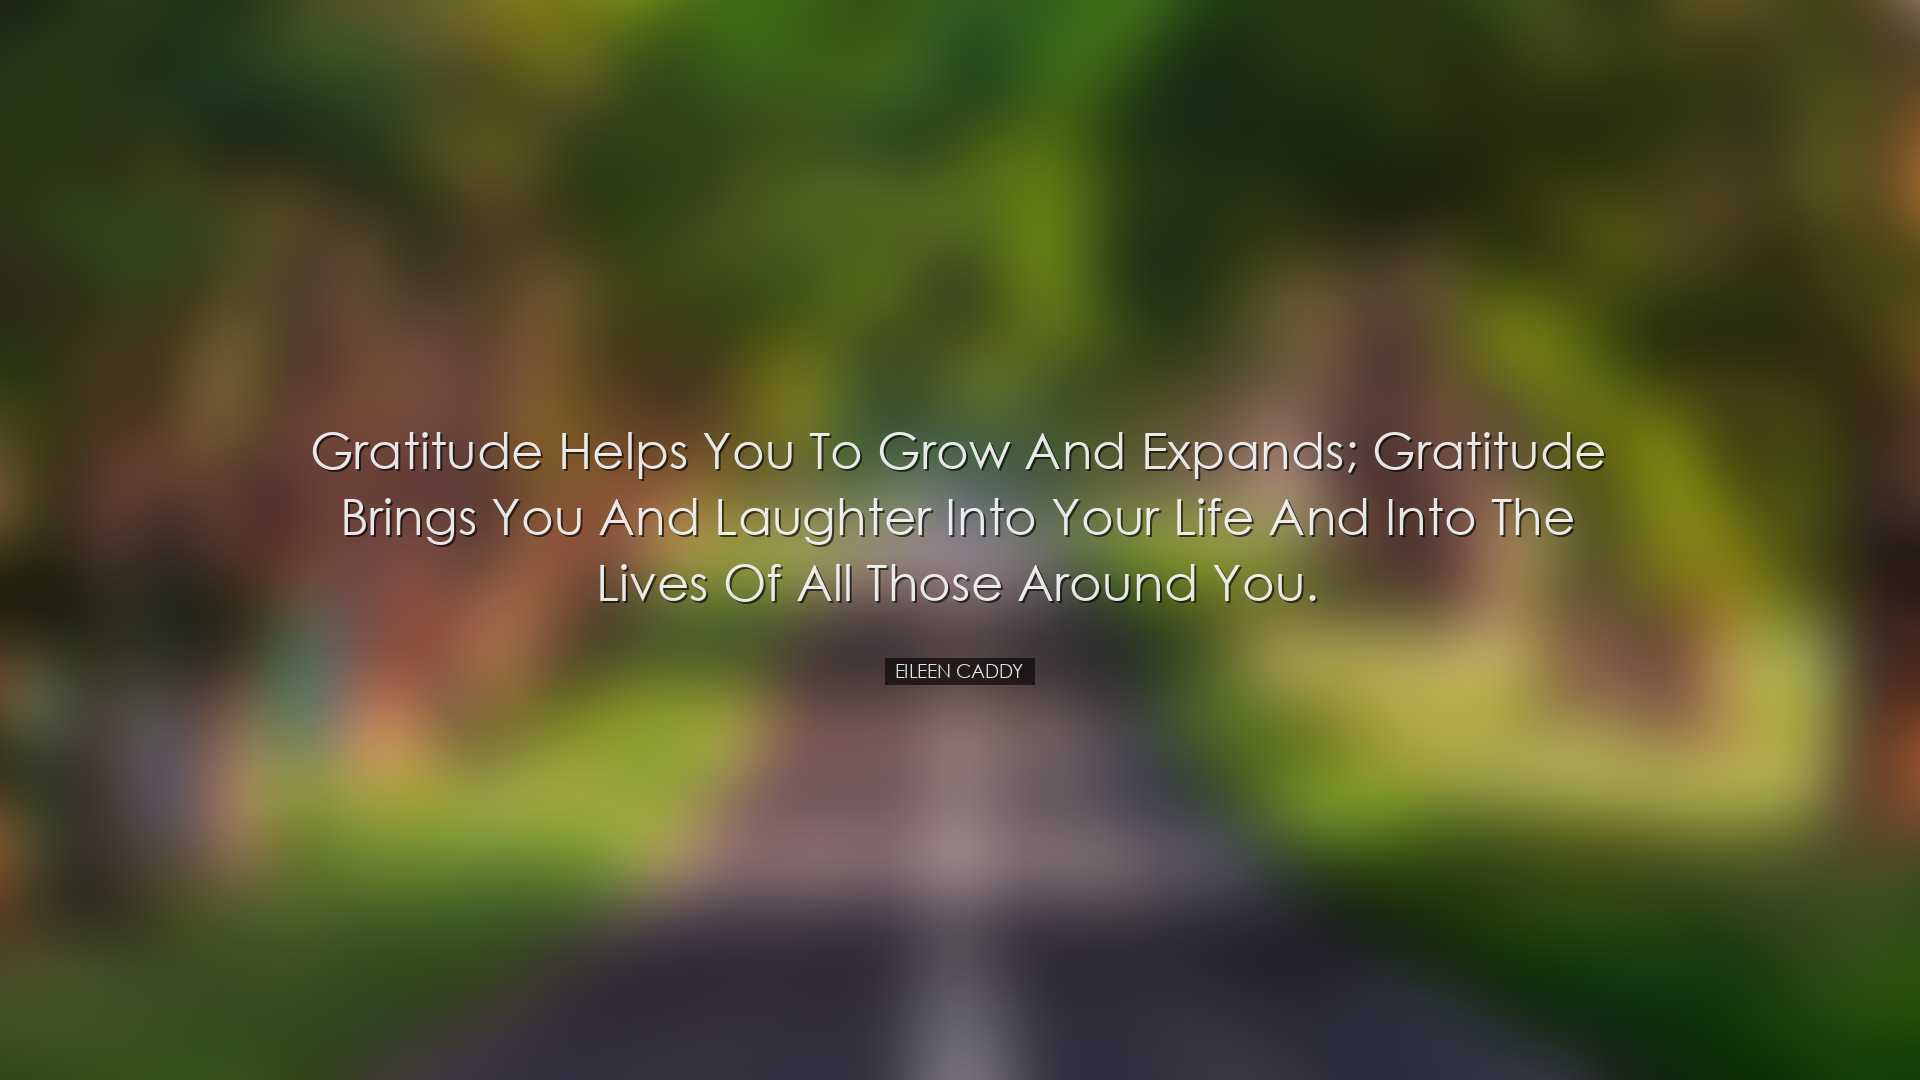 Gratitude helps you to grow and expands; gratitude brings you and